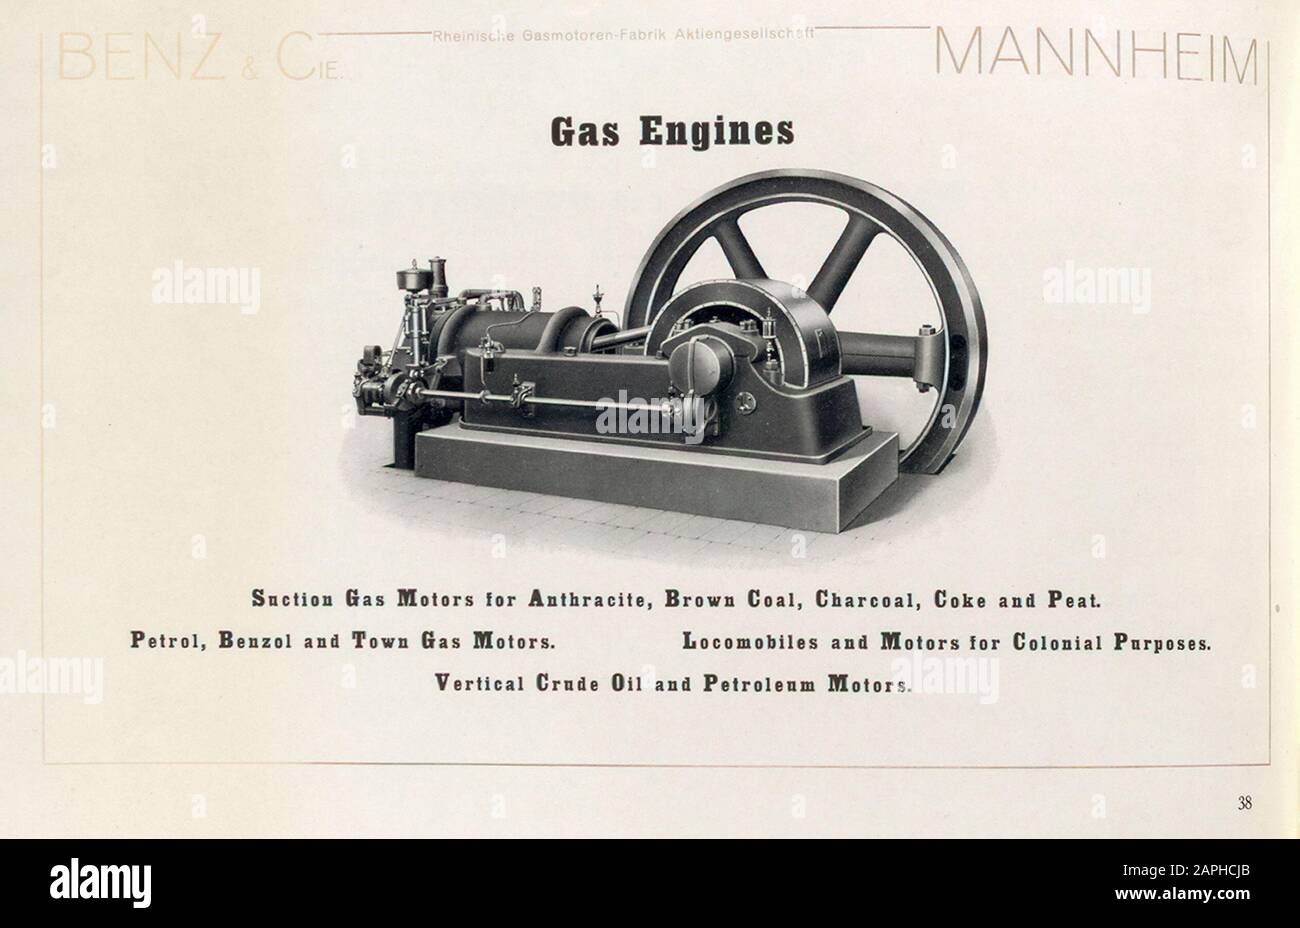 Benz gas Engines, Static Engines and Motors, Mannheim, Germania, dal catalogo Benz & Co, 1909 Foto Stock